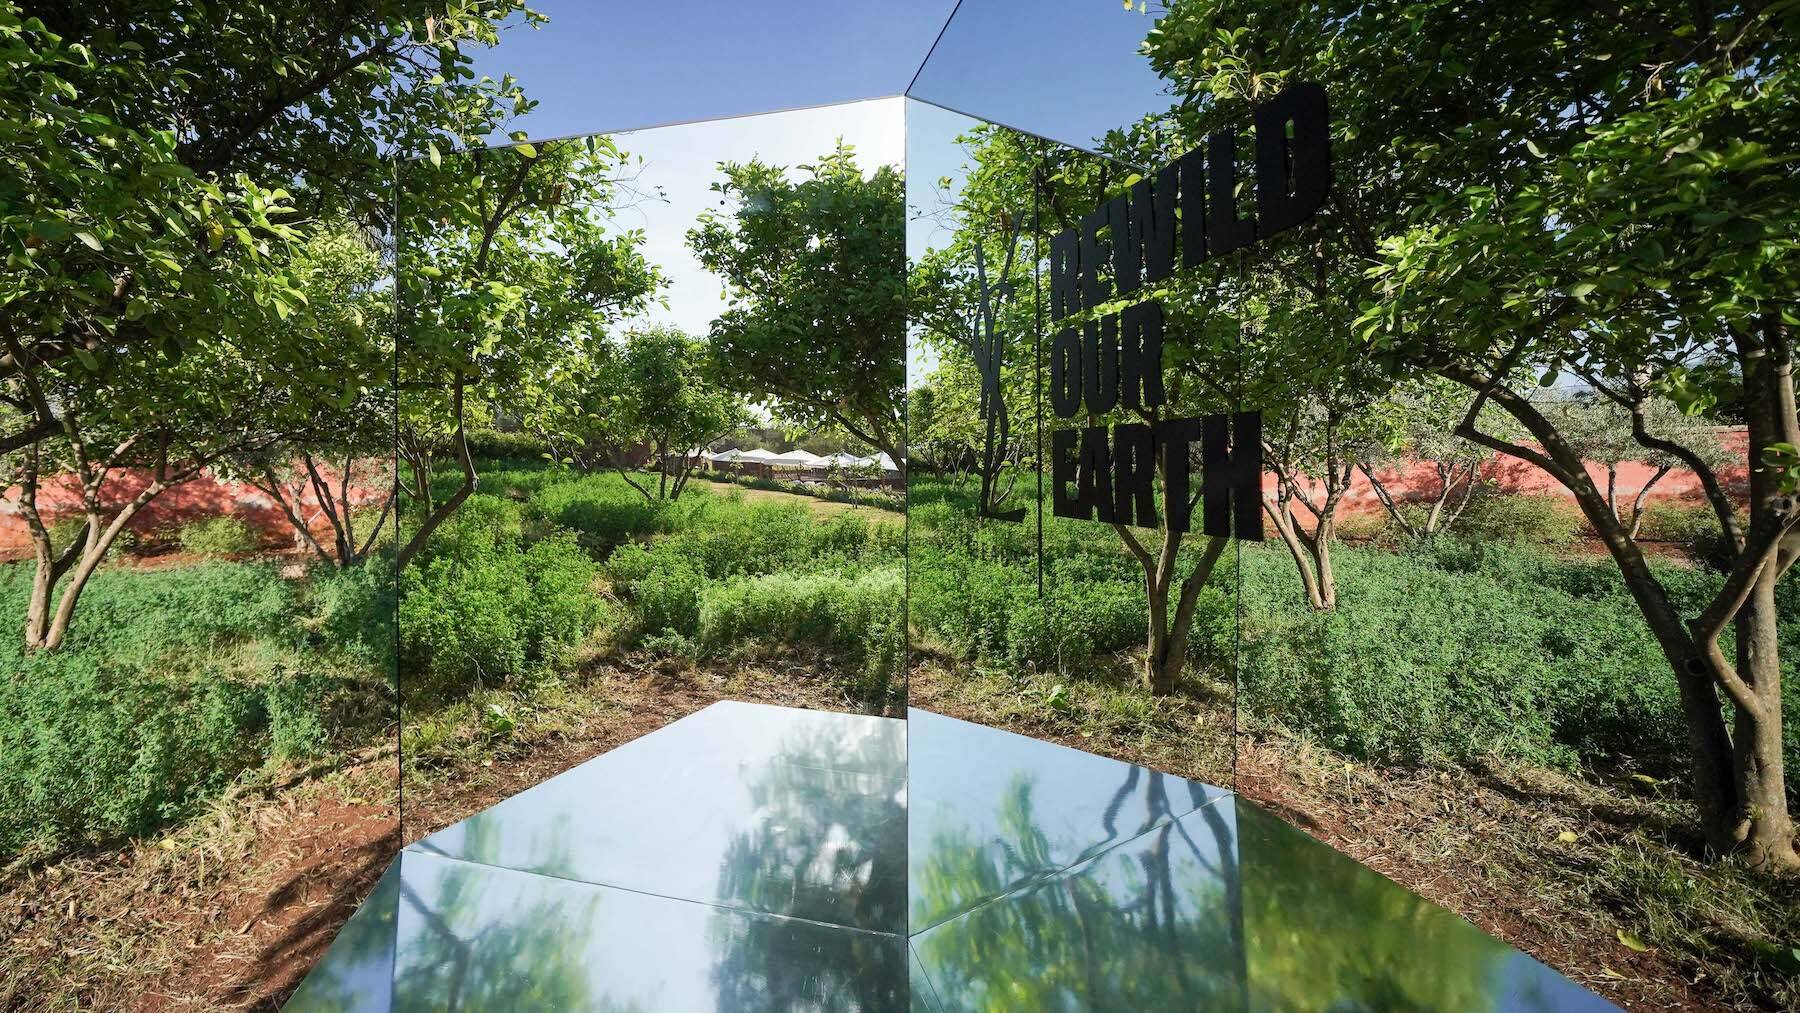 A view of YSL Beauté's Ourika Community Gardens, with a mirrored platform sculpture.